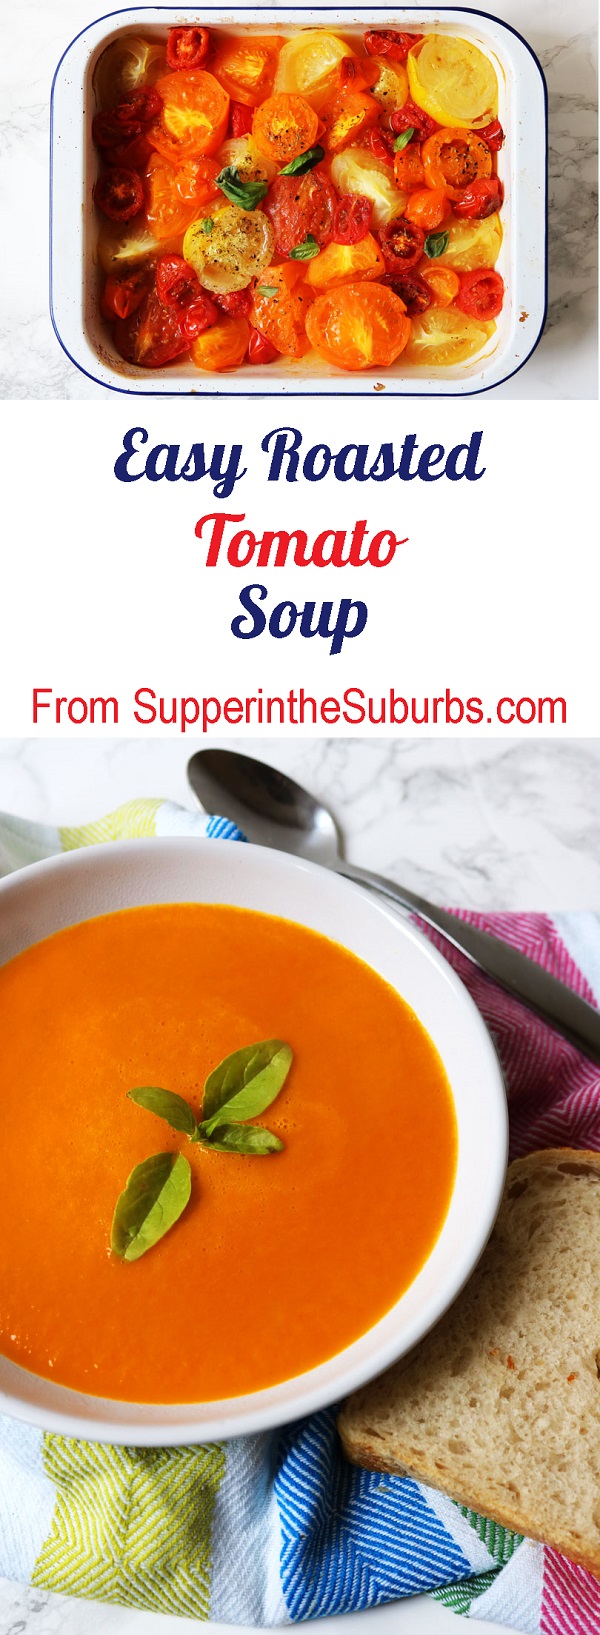 Roasted tomatoes are the key to unlocking flavour in this Easy Tomato Soup recipe from Supper in the Suburbs!